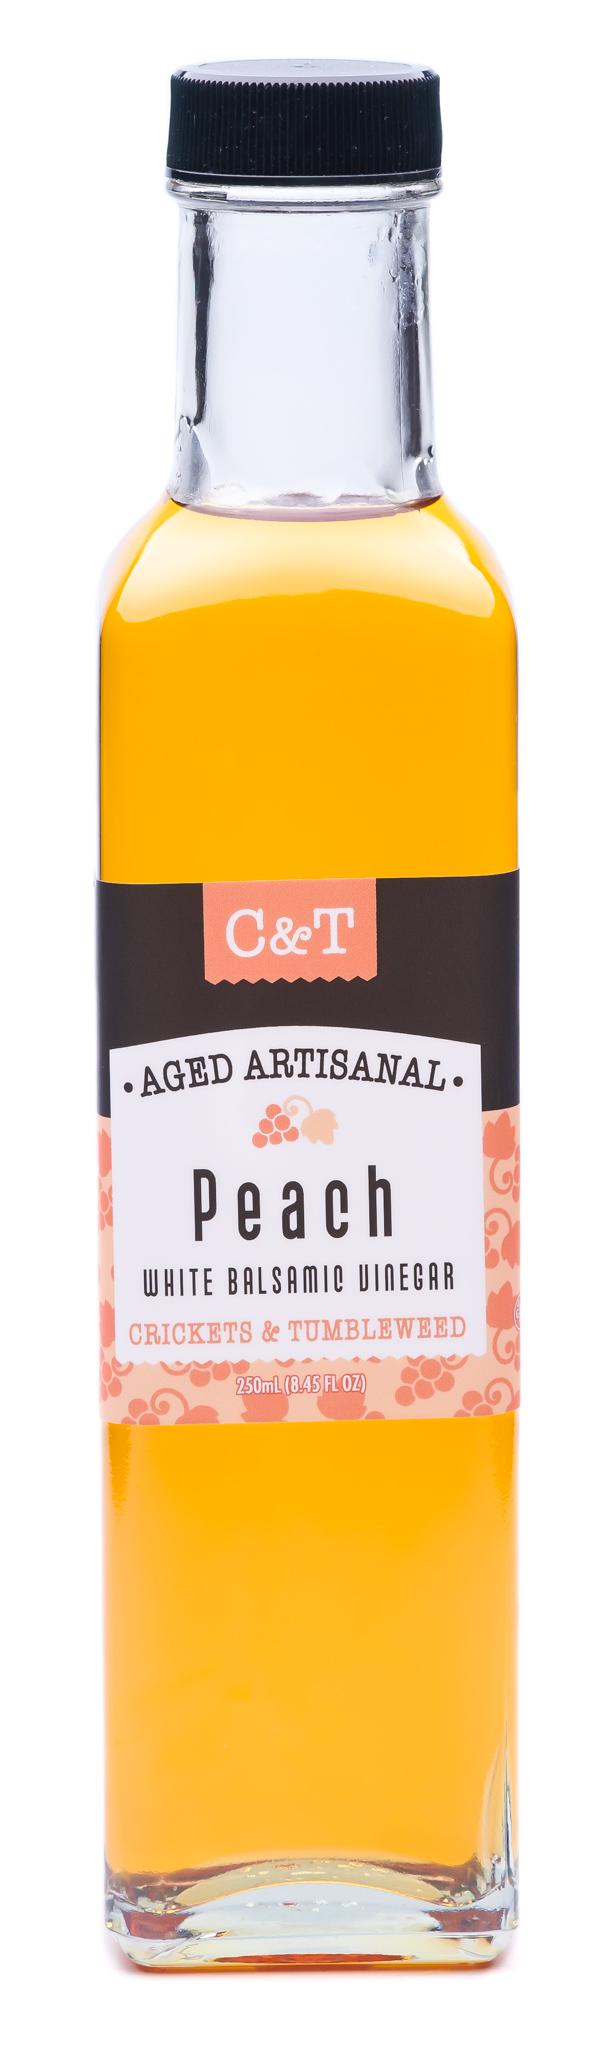 Product Image for C&T Balsamic Peach